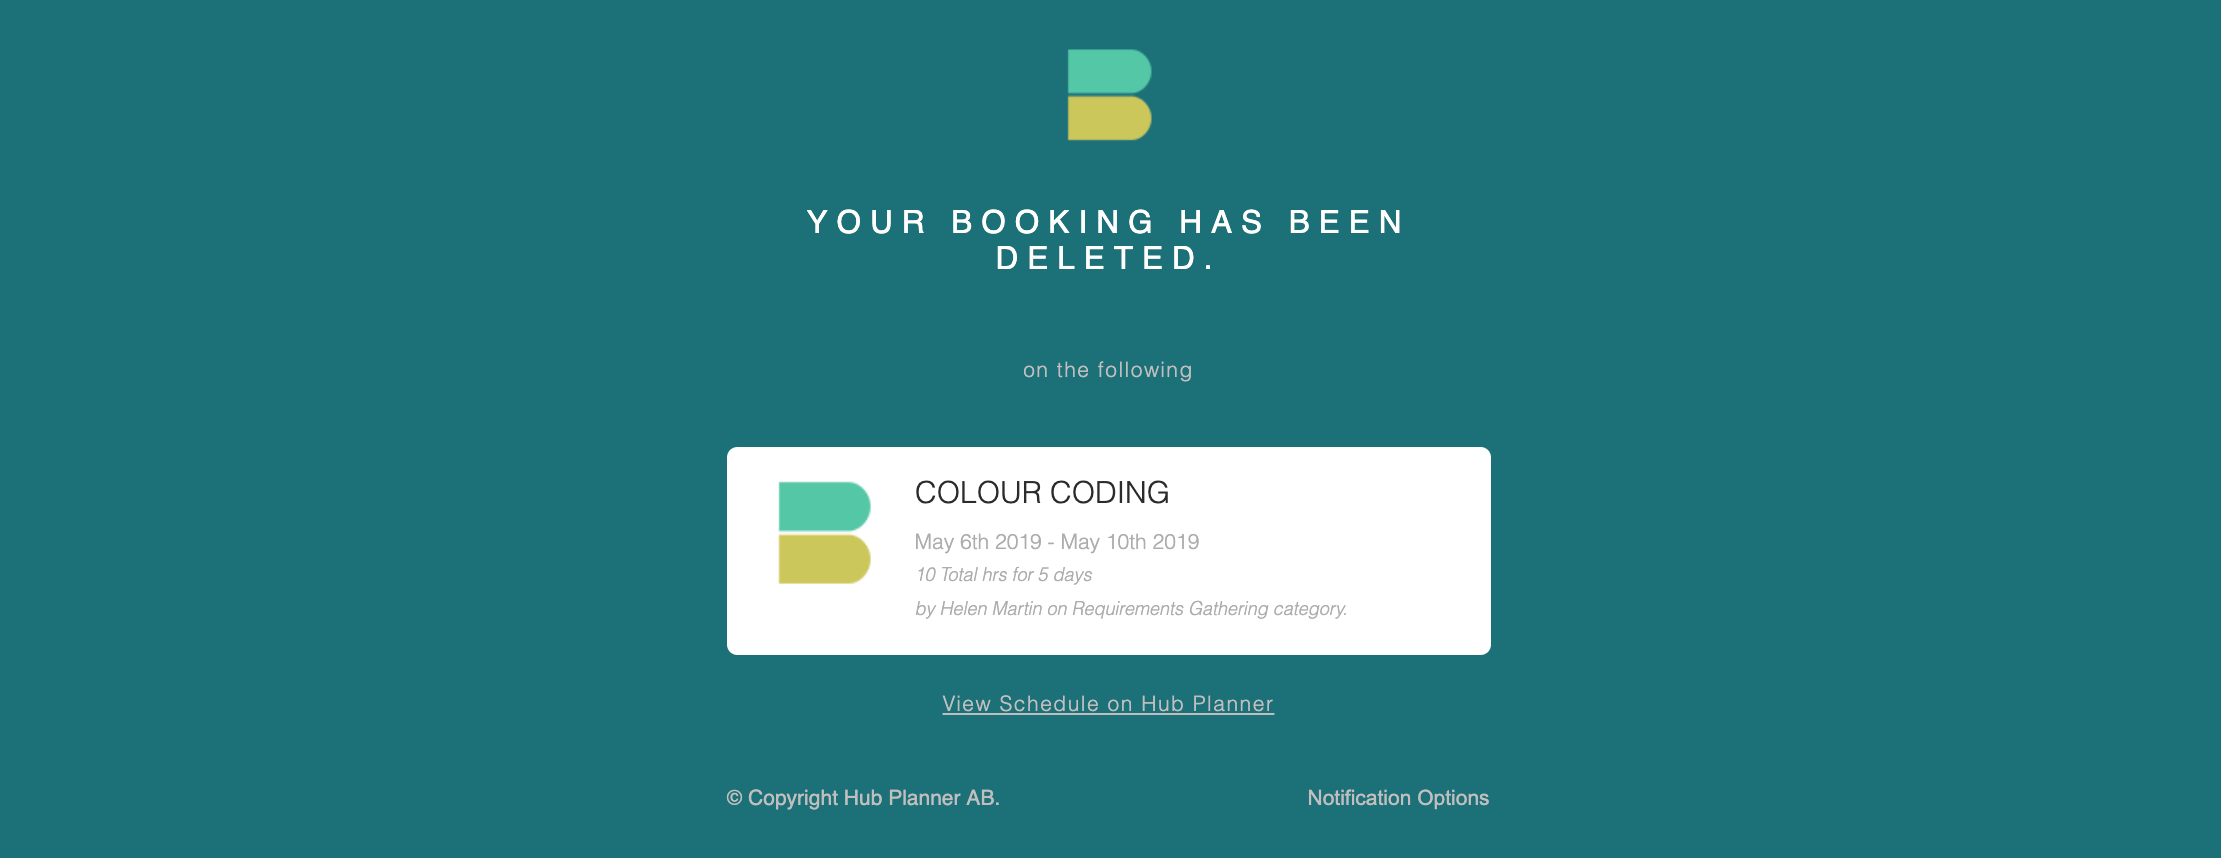 DELETED BOOKING EMAIL NOTIFICATION